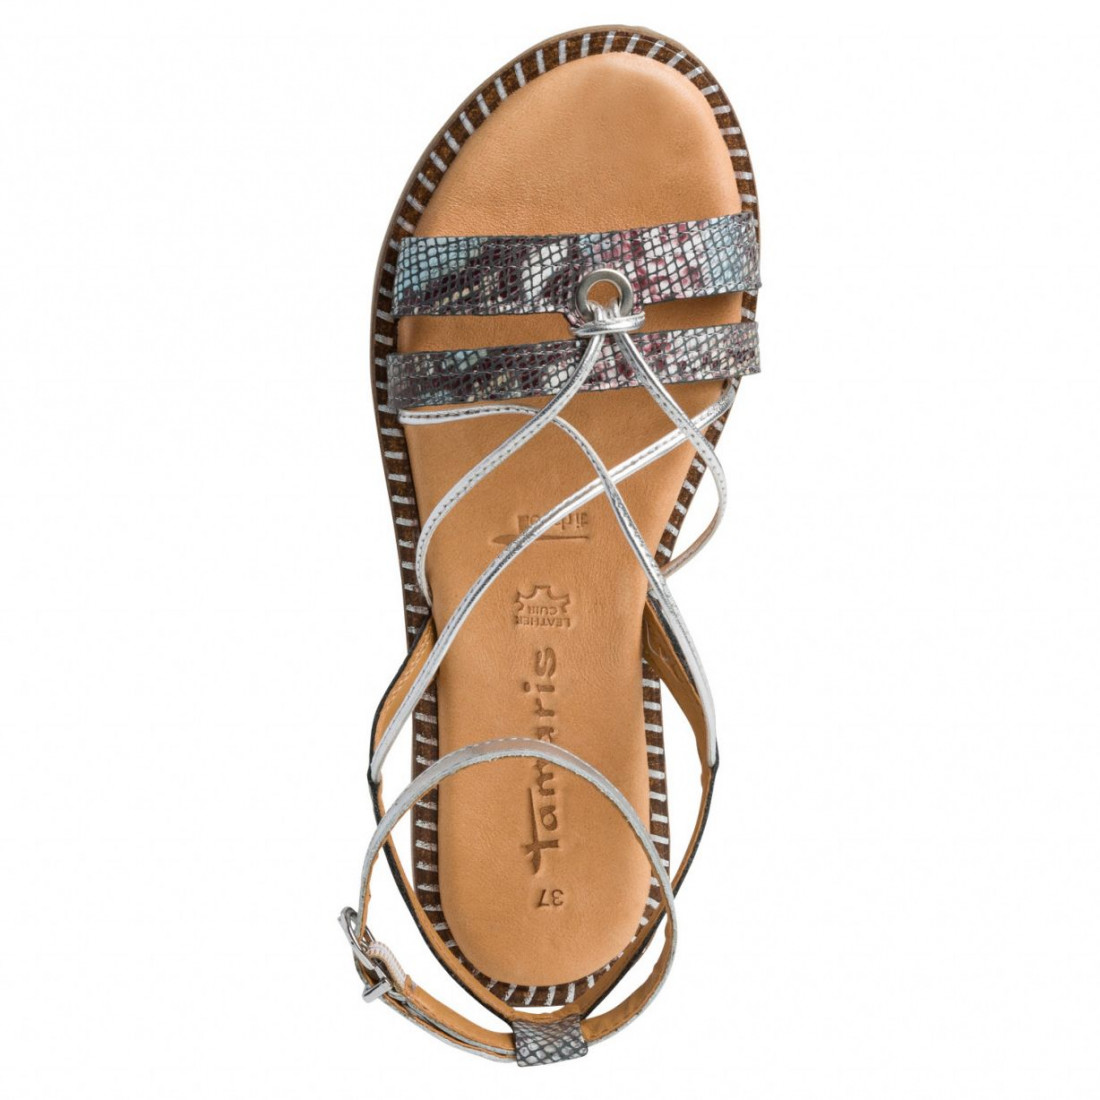 Tamaris flat and straps silver in sandals effect pyton with blue